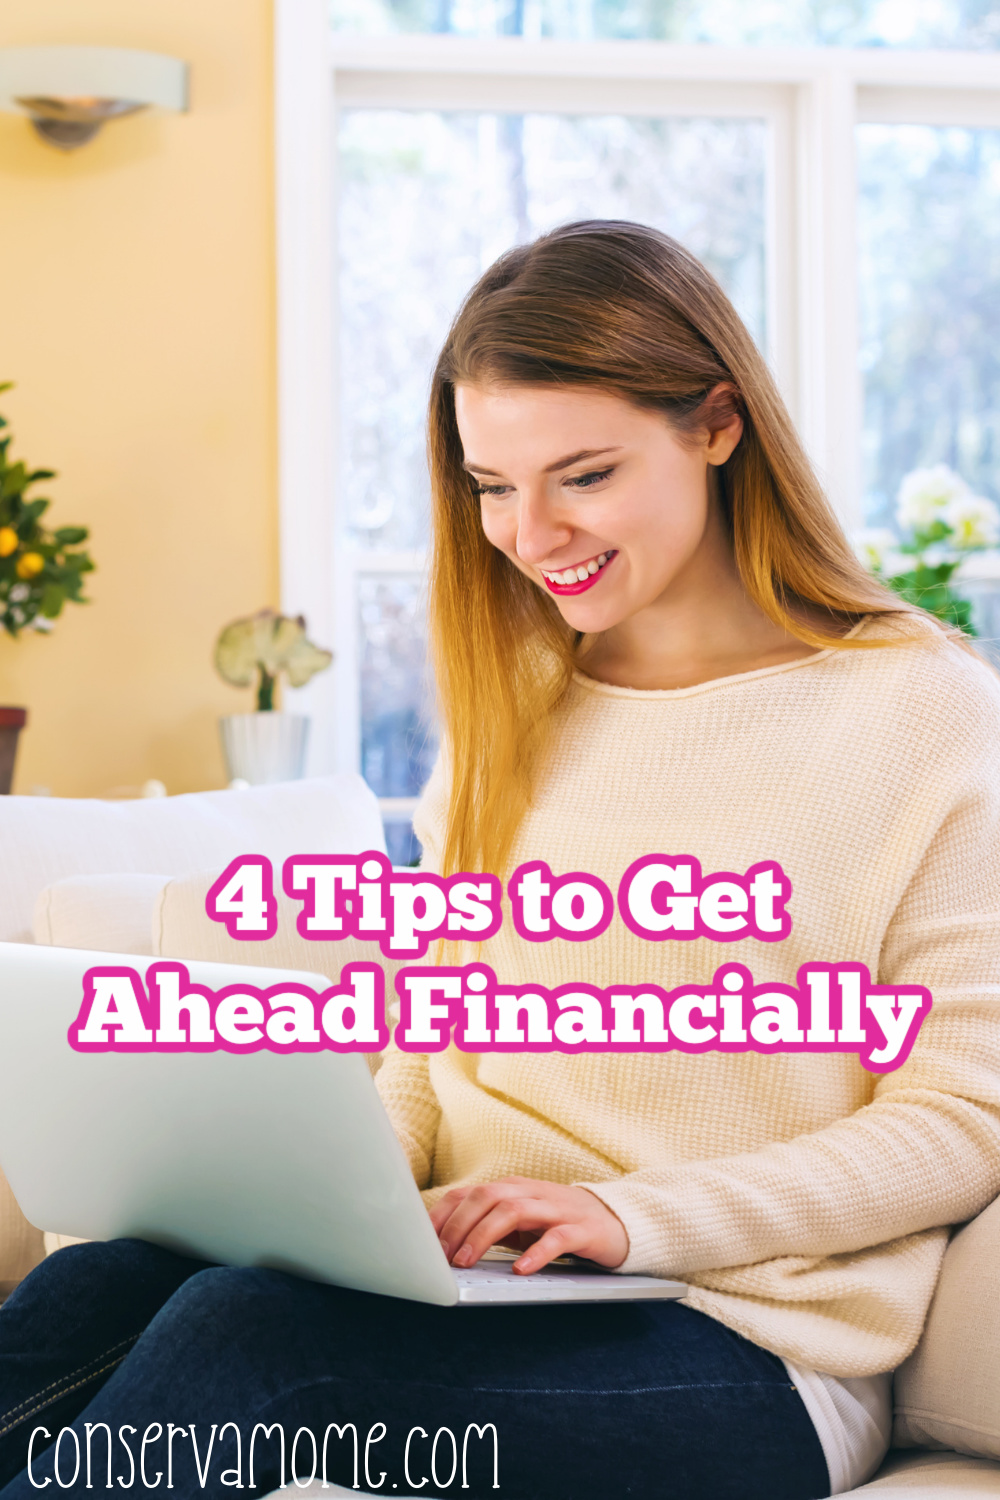 4 Tips to Get Ahead Financially